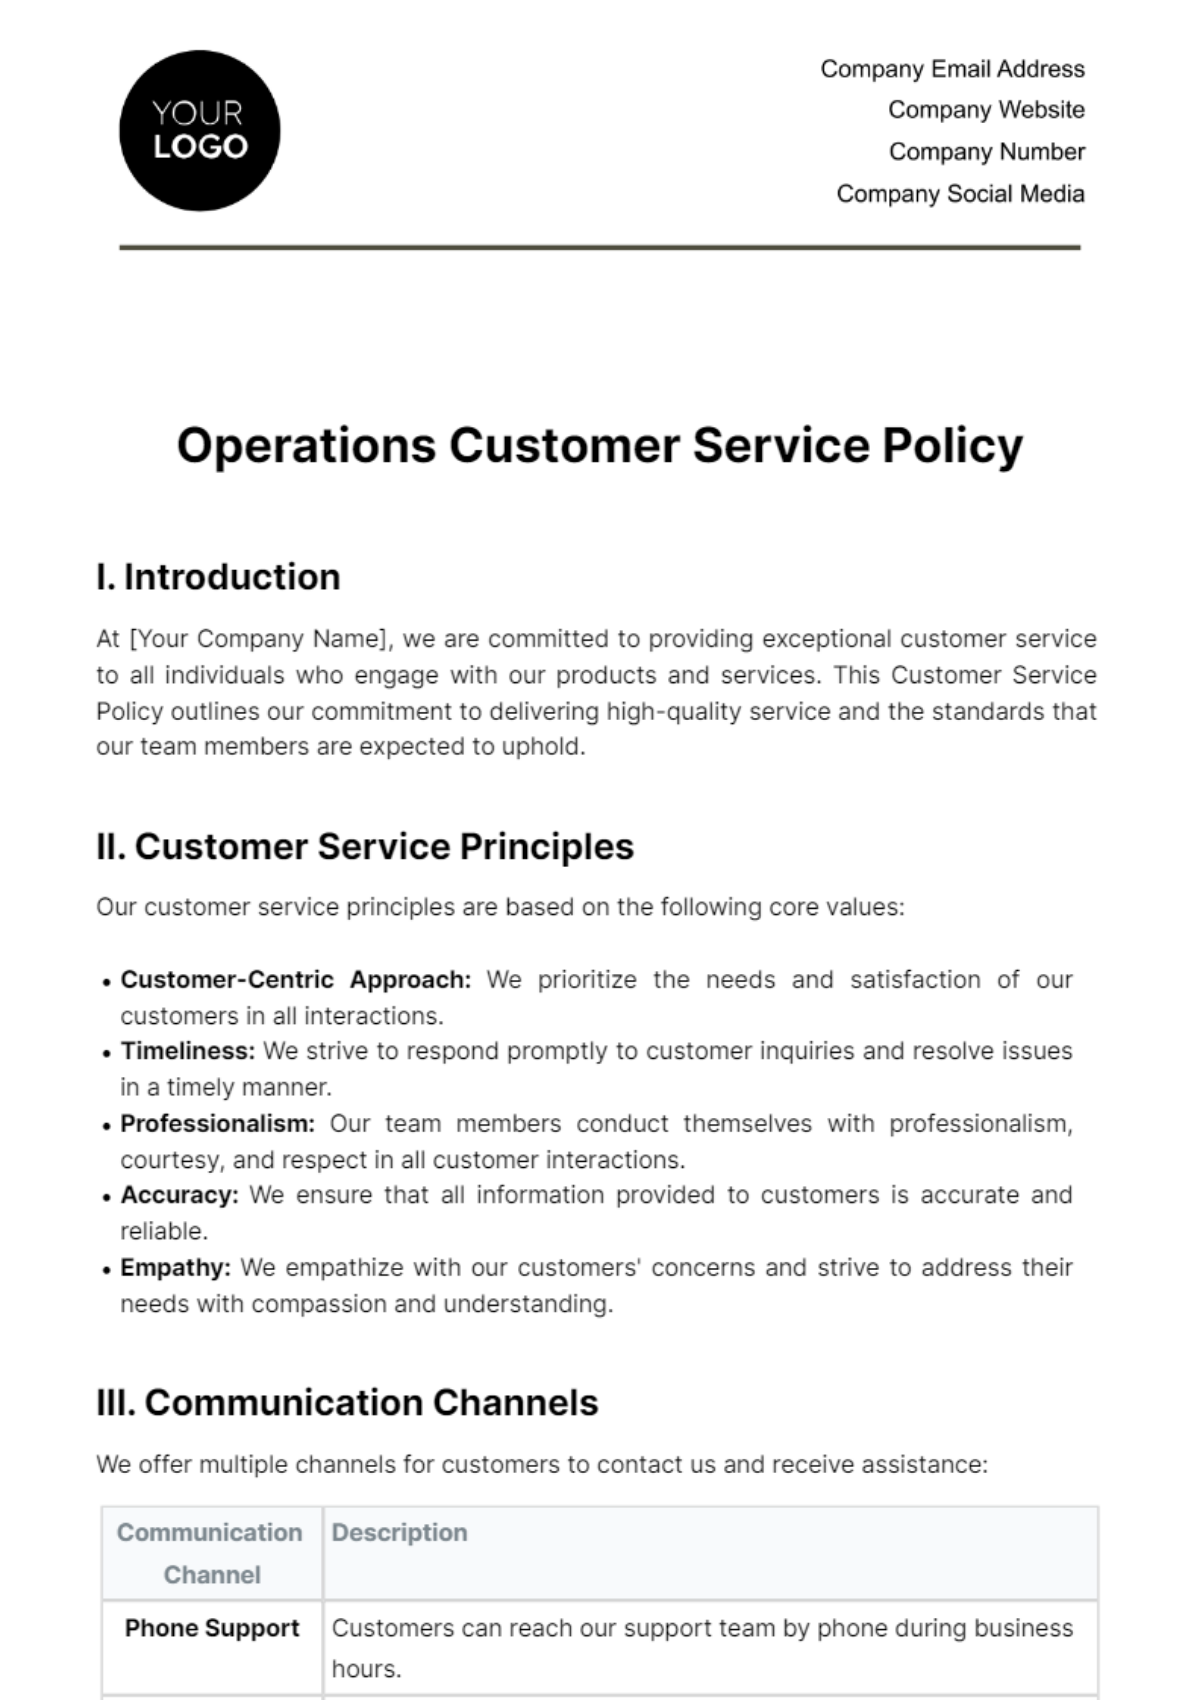 Operations Customer Service Policy Template